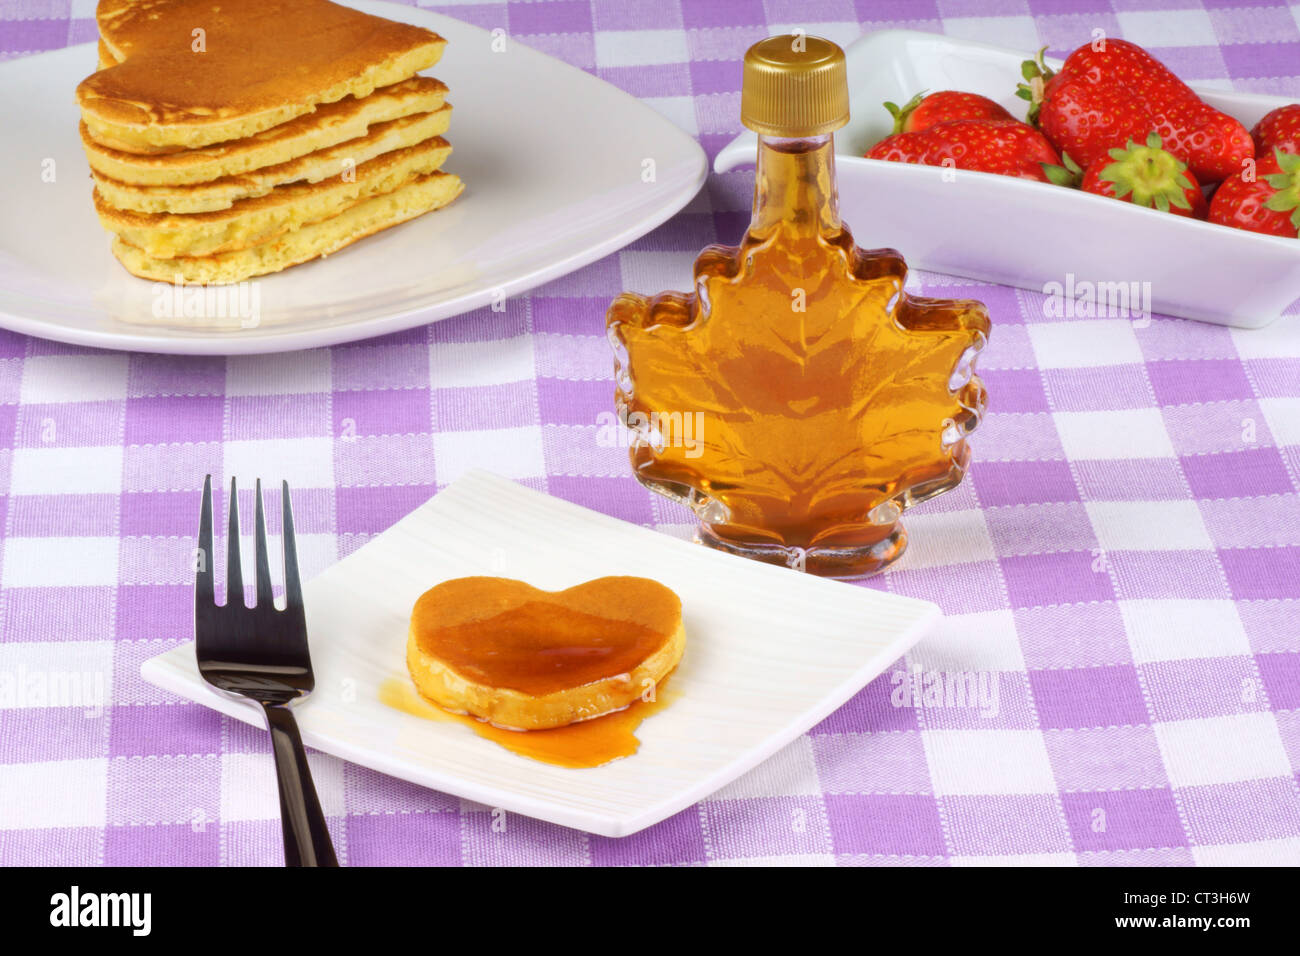 Mini heart-shaped pancake with syrup on a white dish with fork. For Valentine's day breakfast Stock Photo